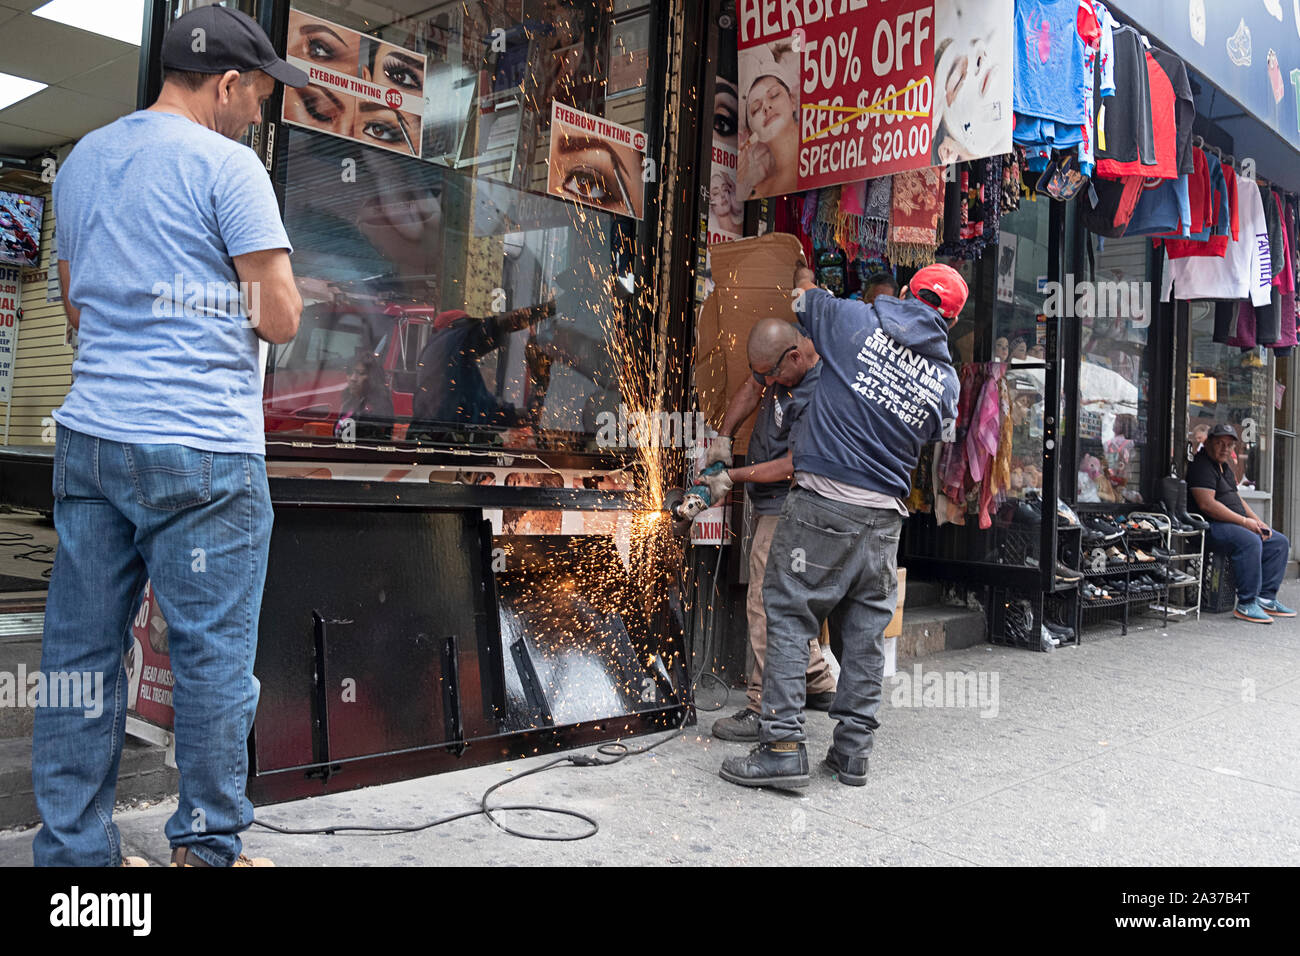 A structural iron & steel worker works on a storefront door while a colleague shields the adjacent store from sparks. In Jackson Heights, Queens, NYC. Stock Photo